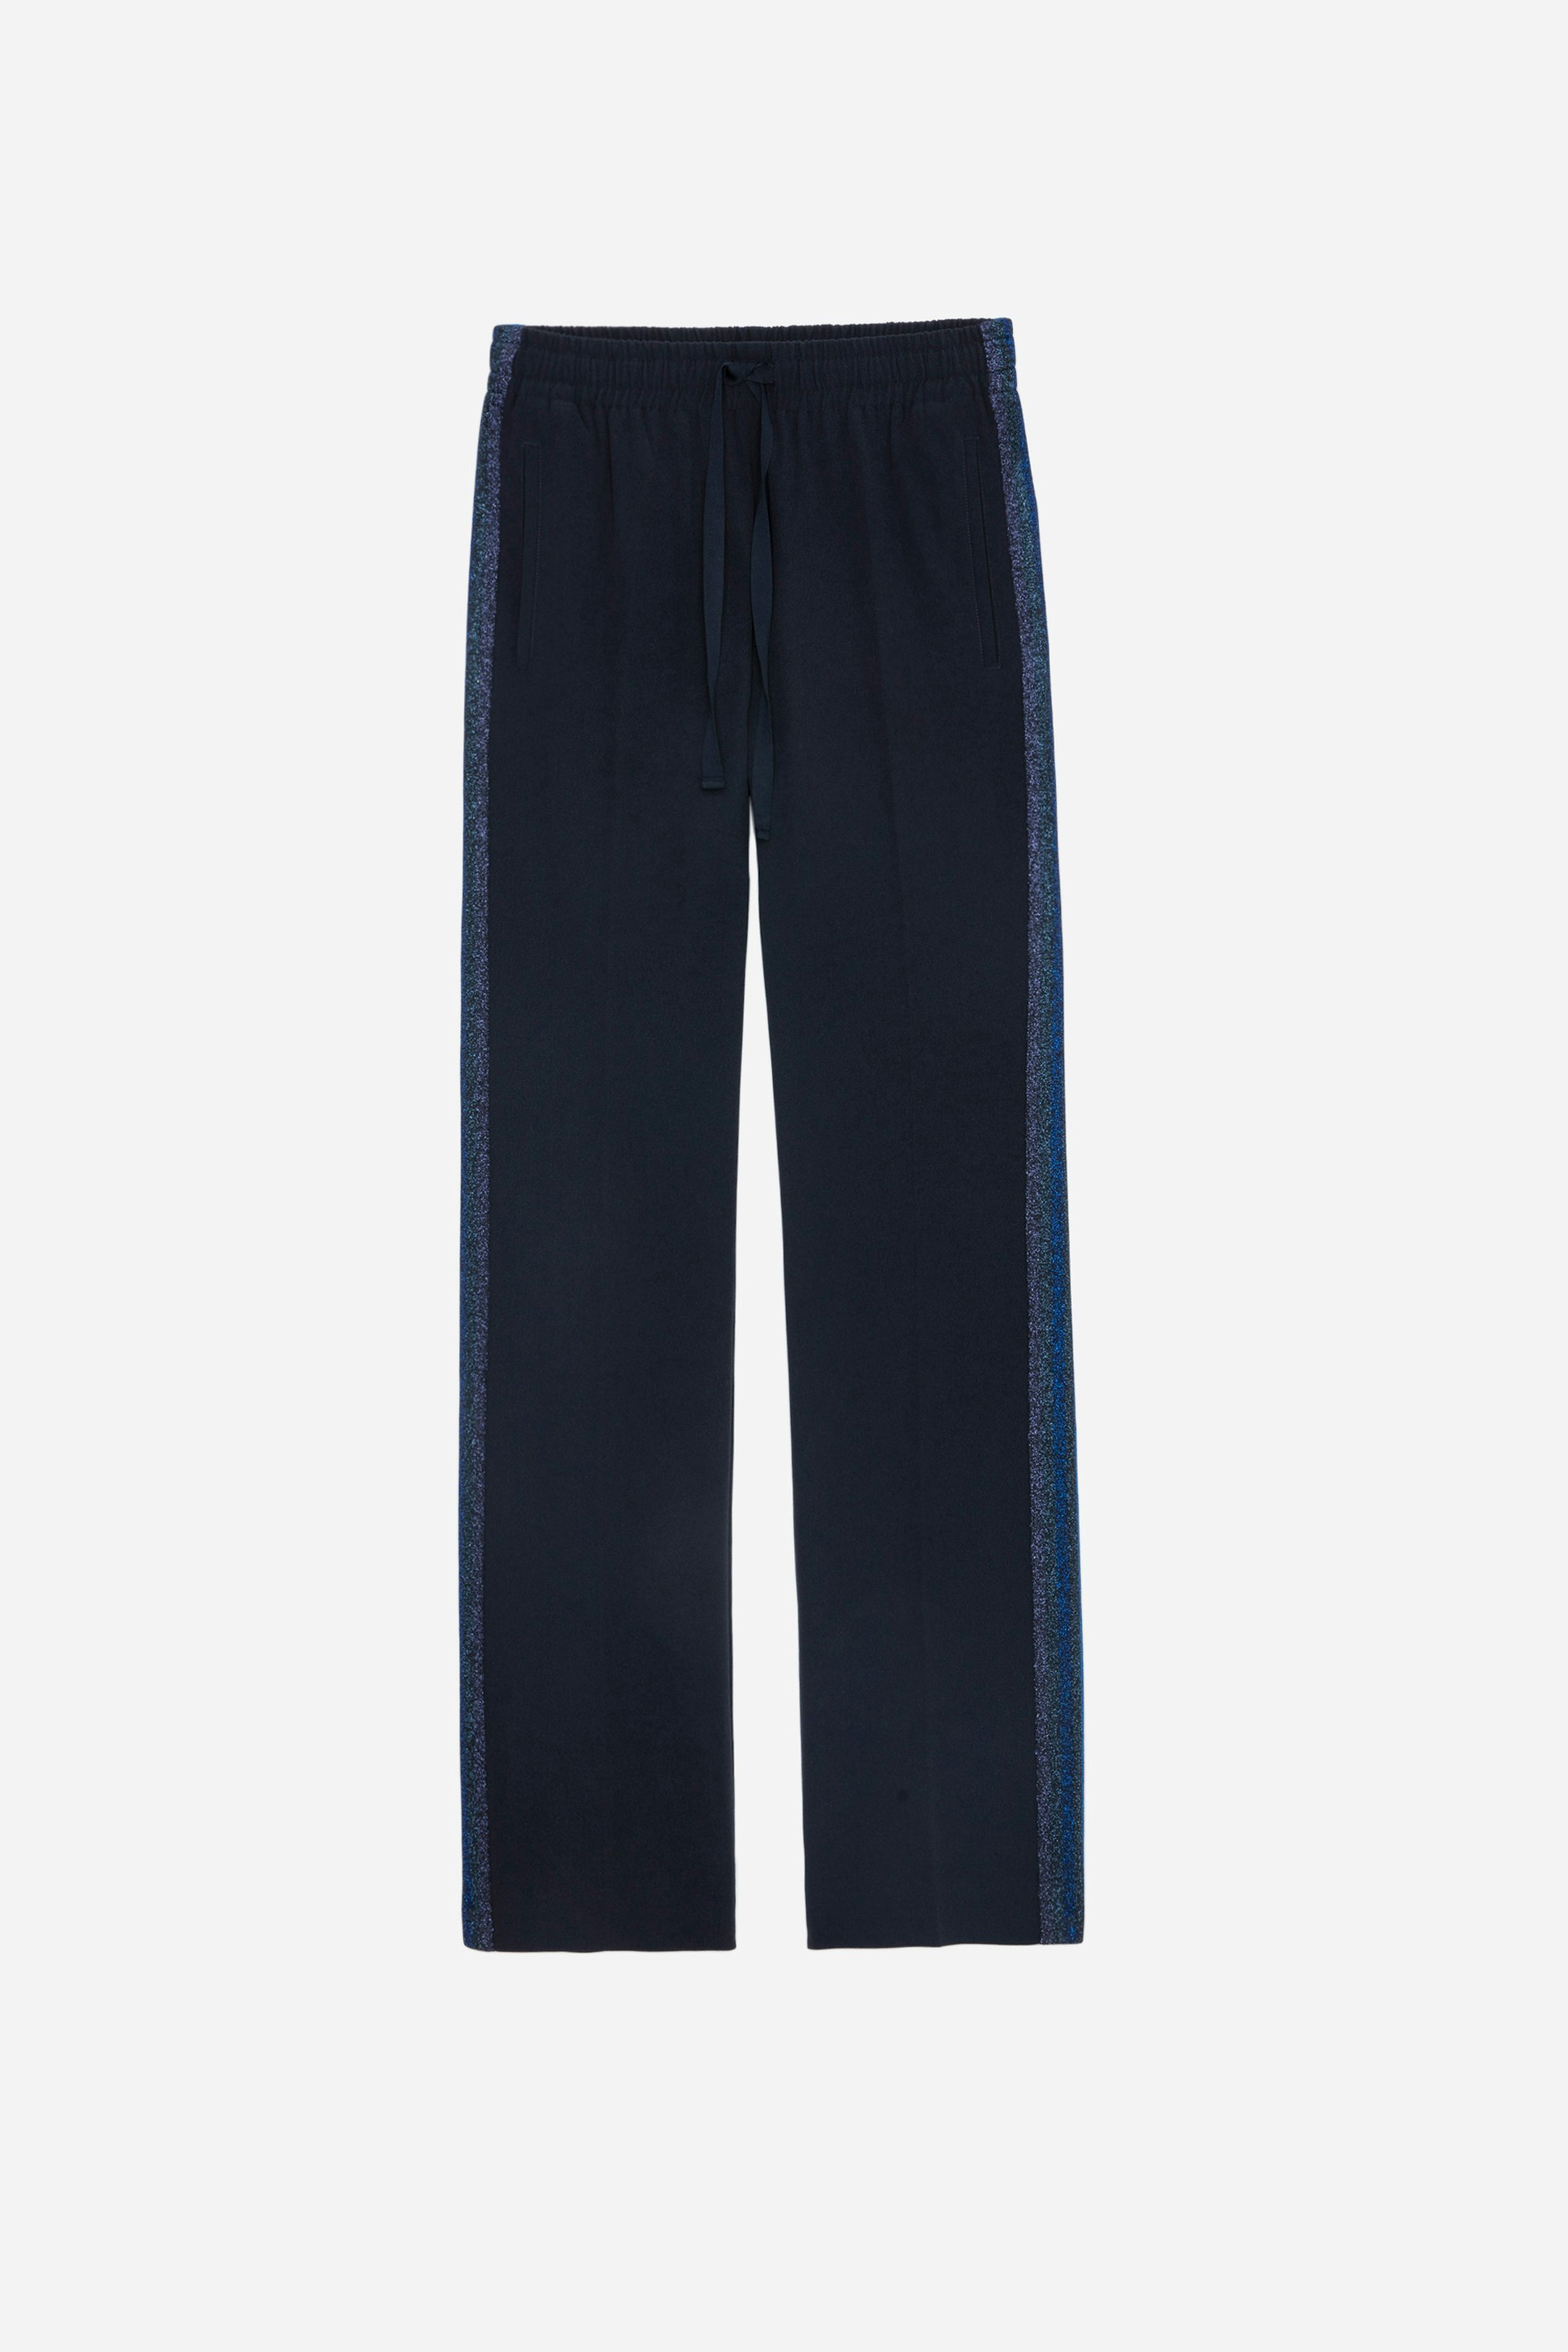 Pomy Trousers - Women’s navy blue crepe trousers with glittery side bands